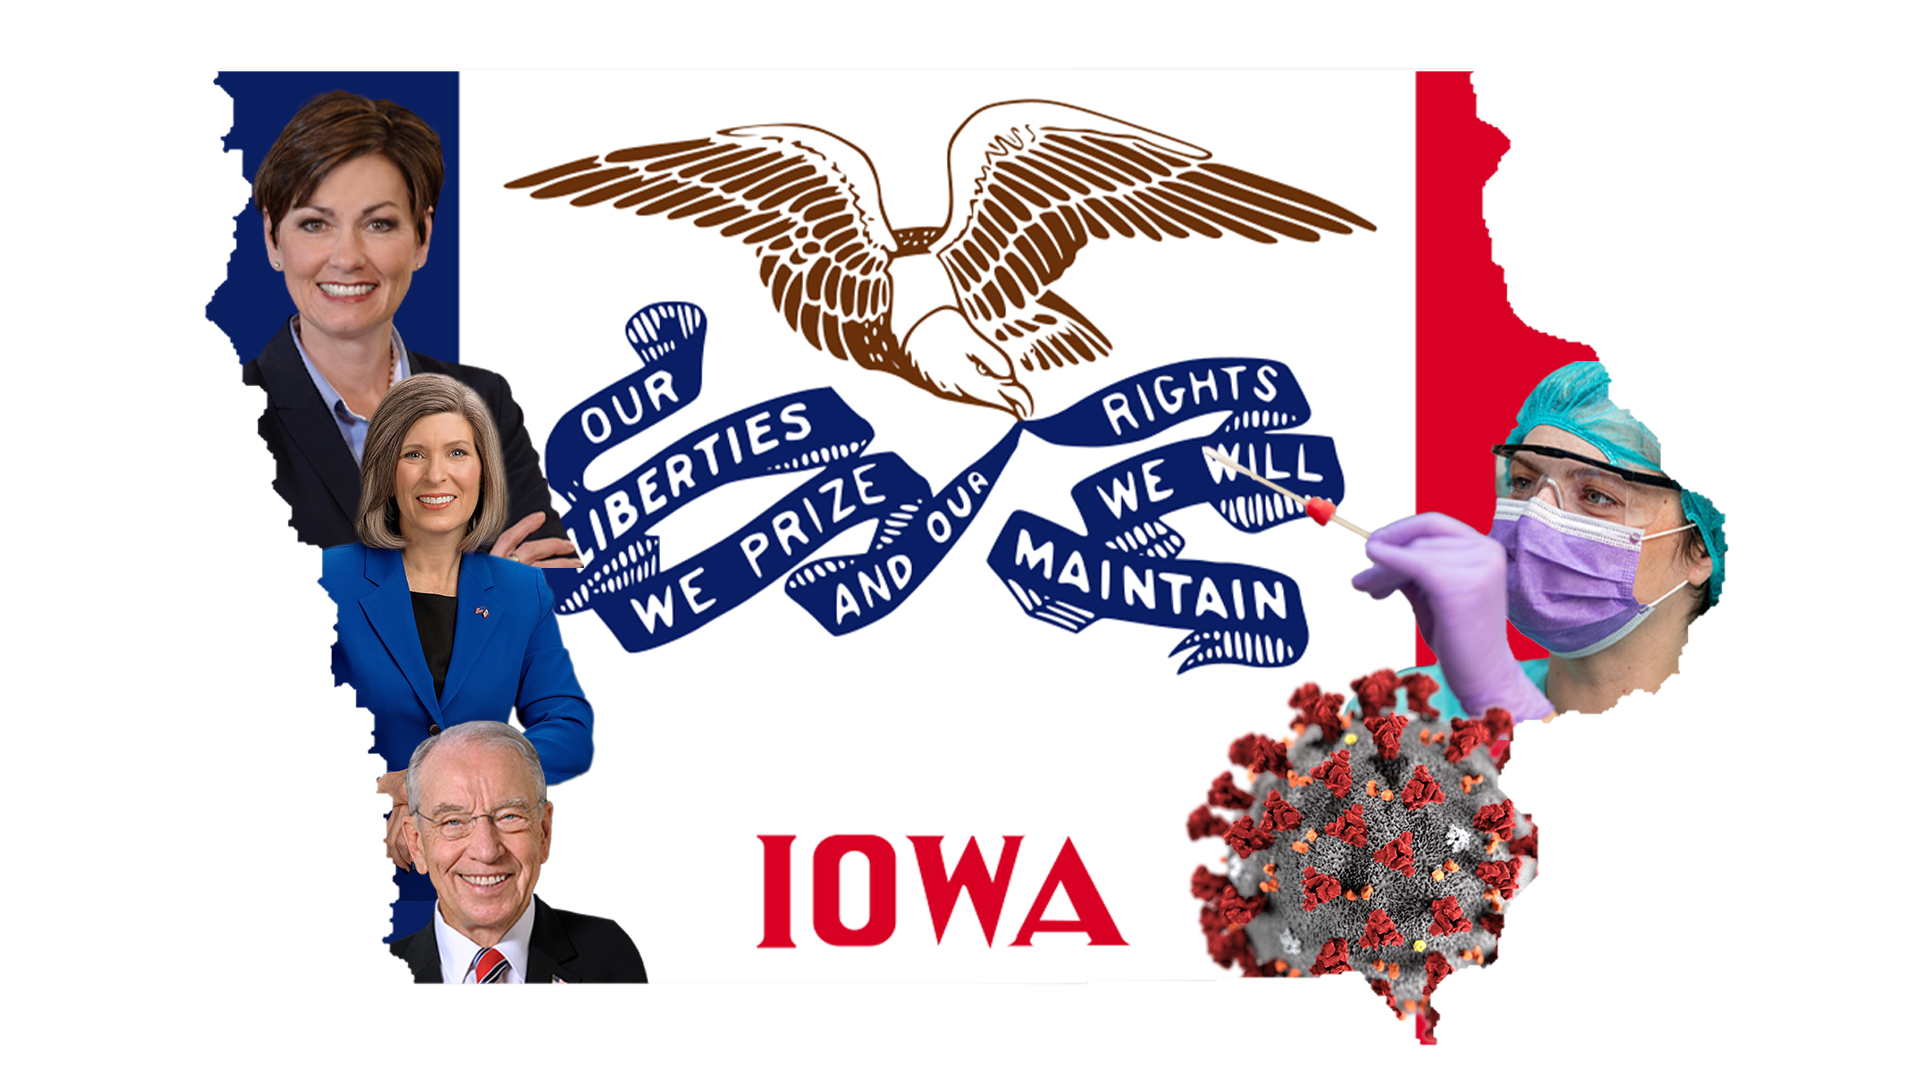 The Iowa state flag surrounded by images of the governor, senators, a COVID-19 cell, and a medical professional.